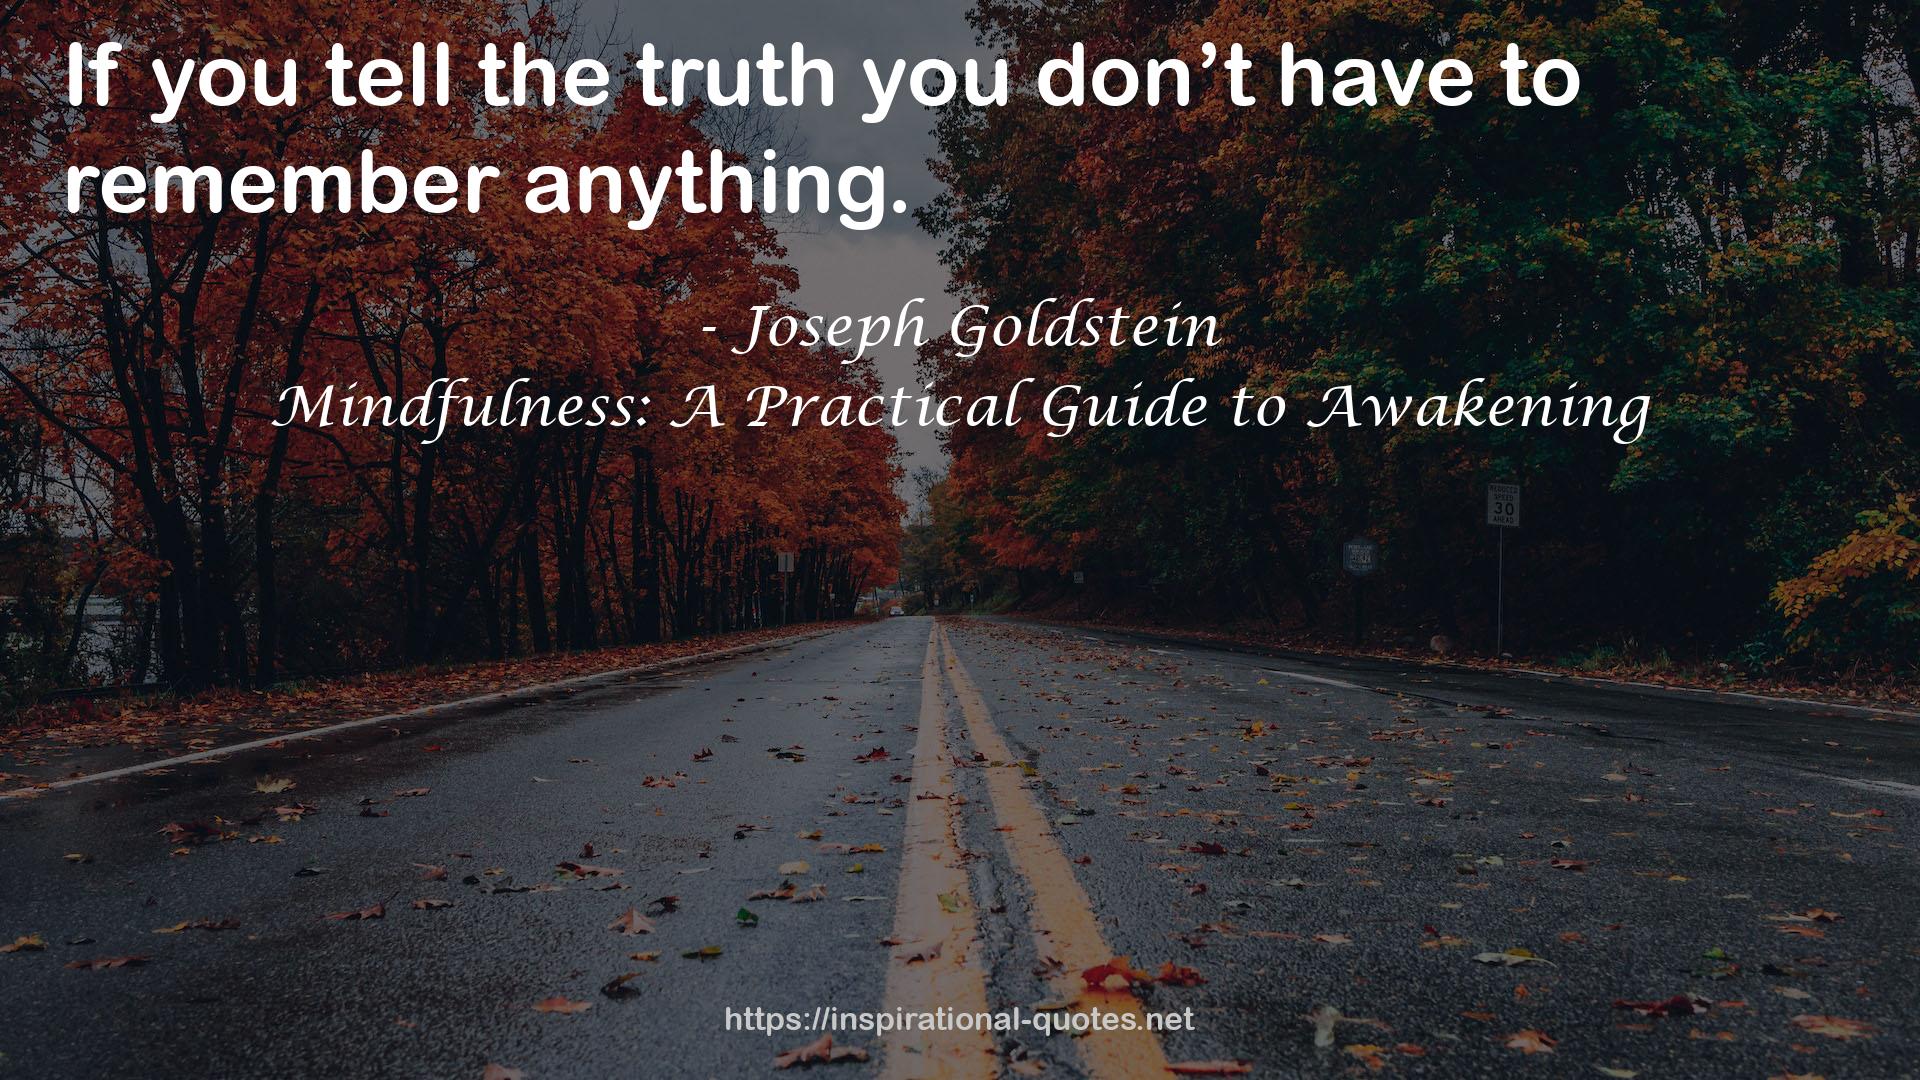 Mindfulness: A Practical Guide to Awakening QUOTES